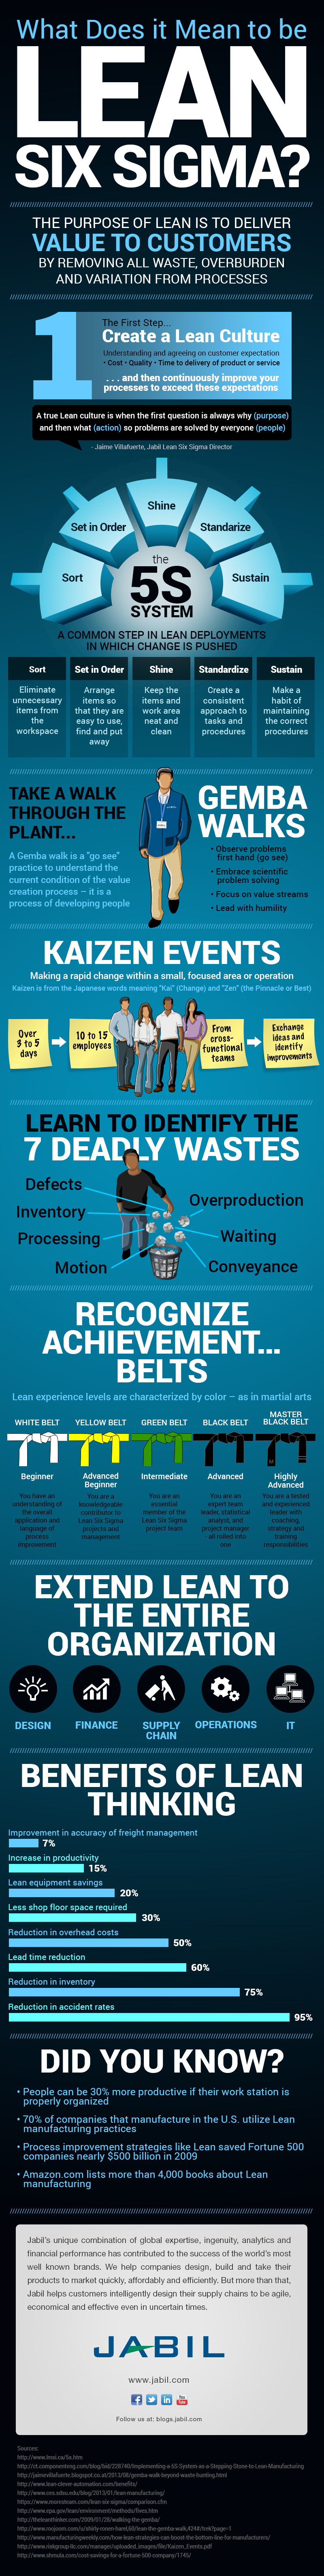 infographic explaining the definition of lean six sigma